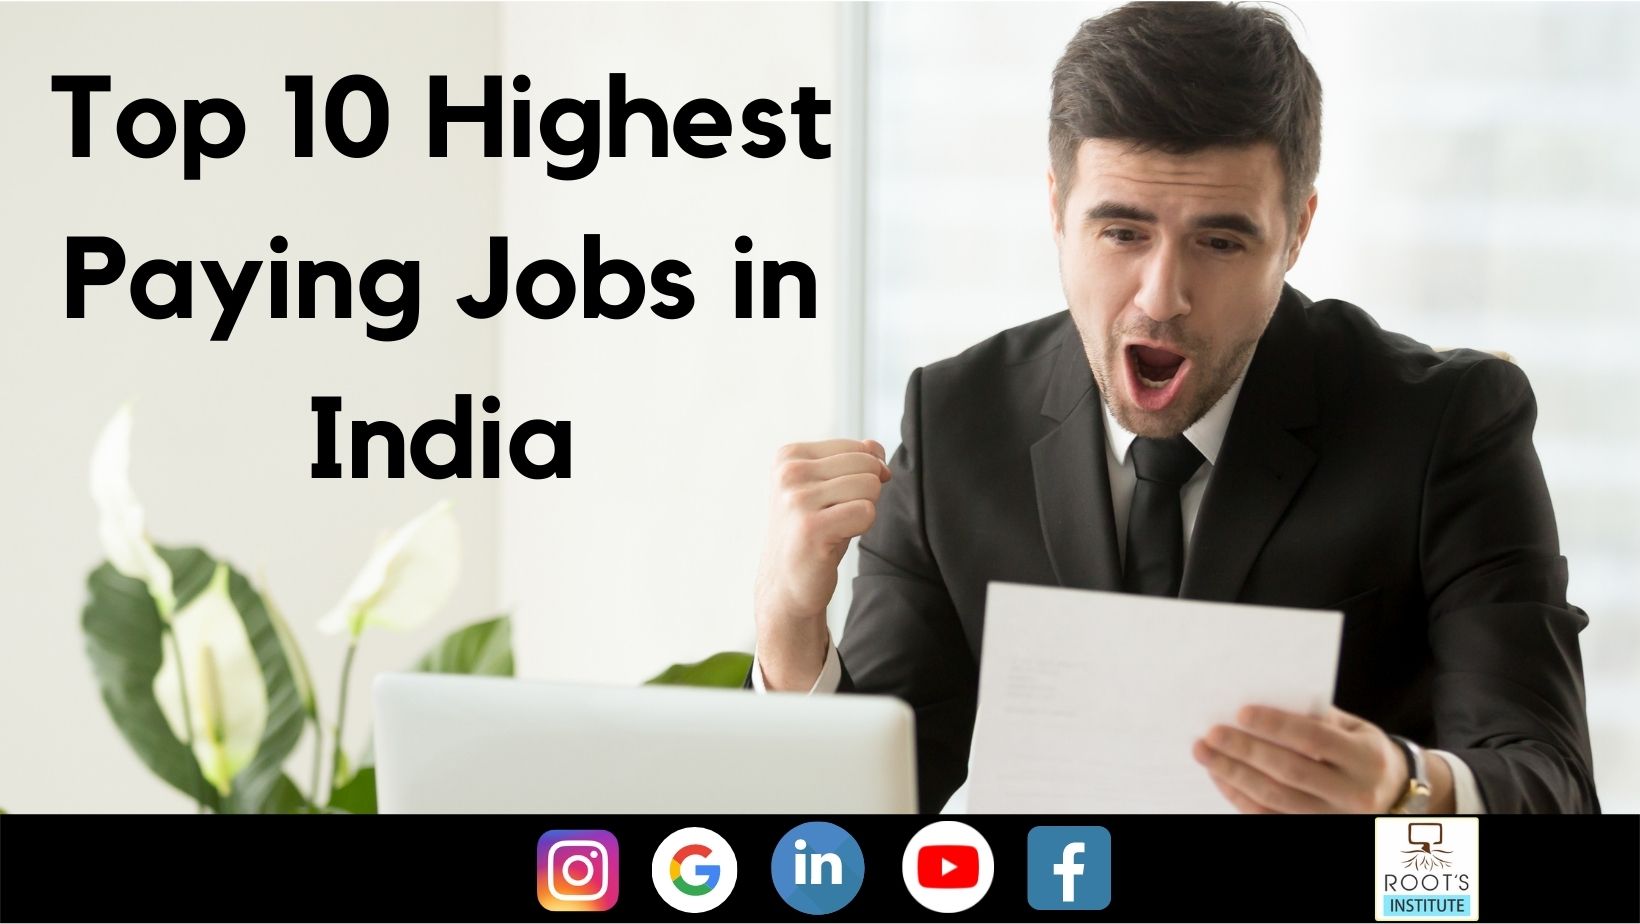 Top 10 Highest Paying Jobs in India